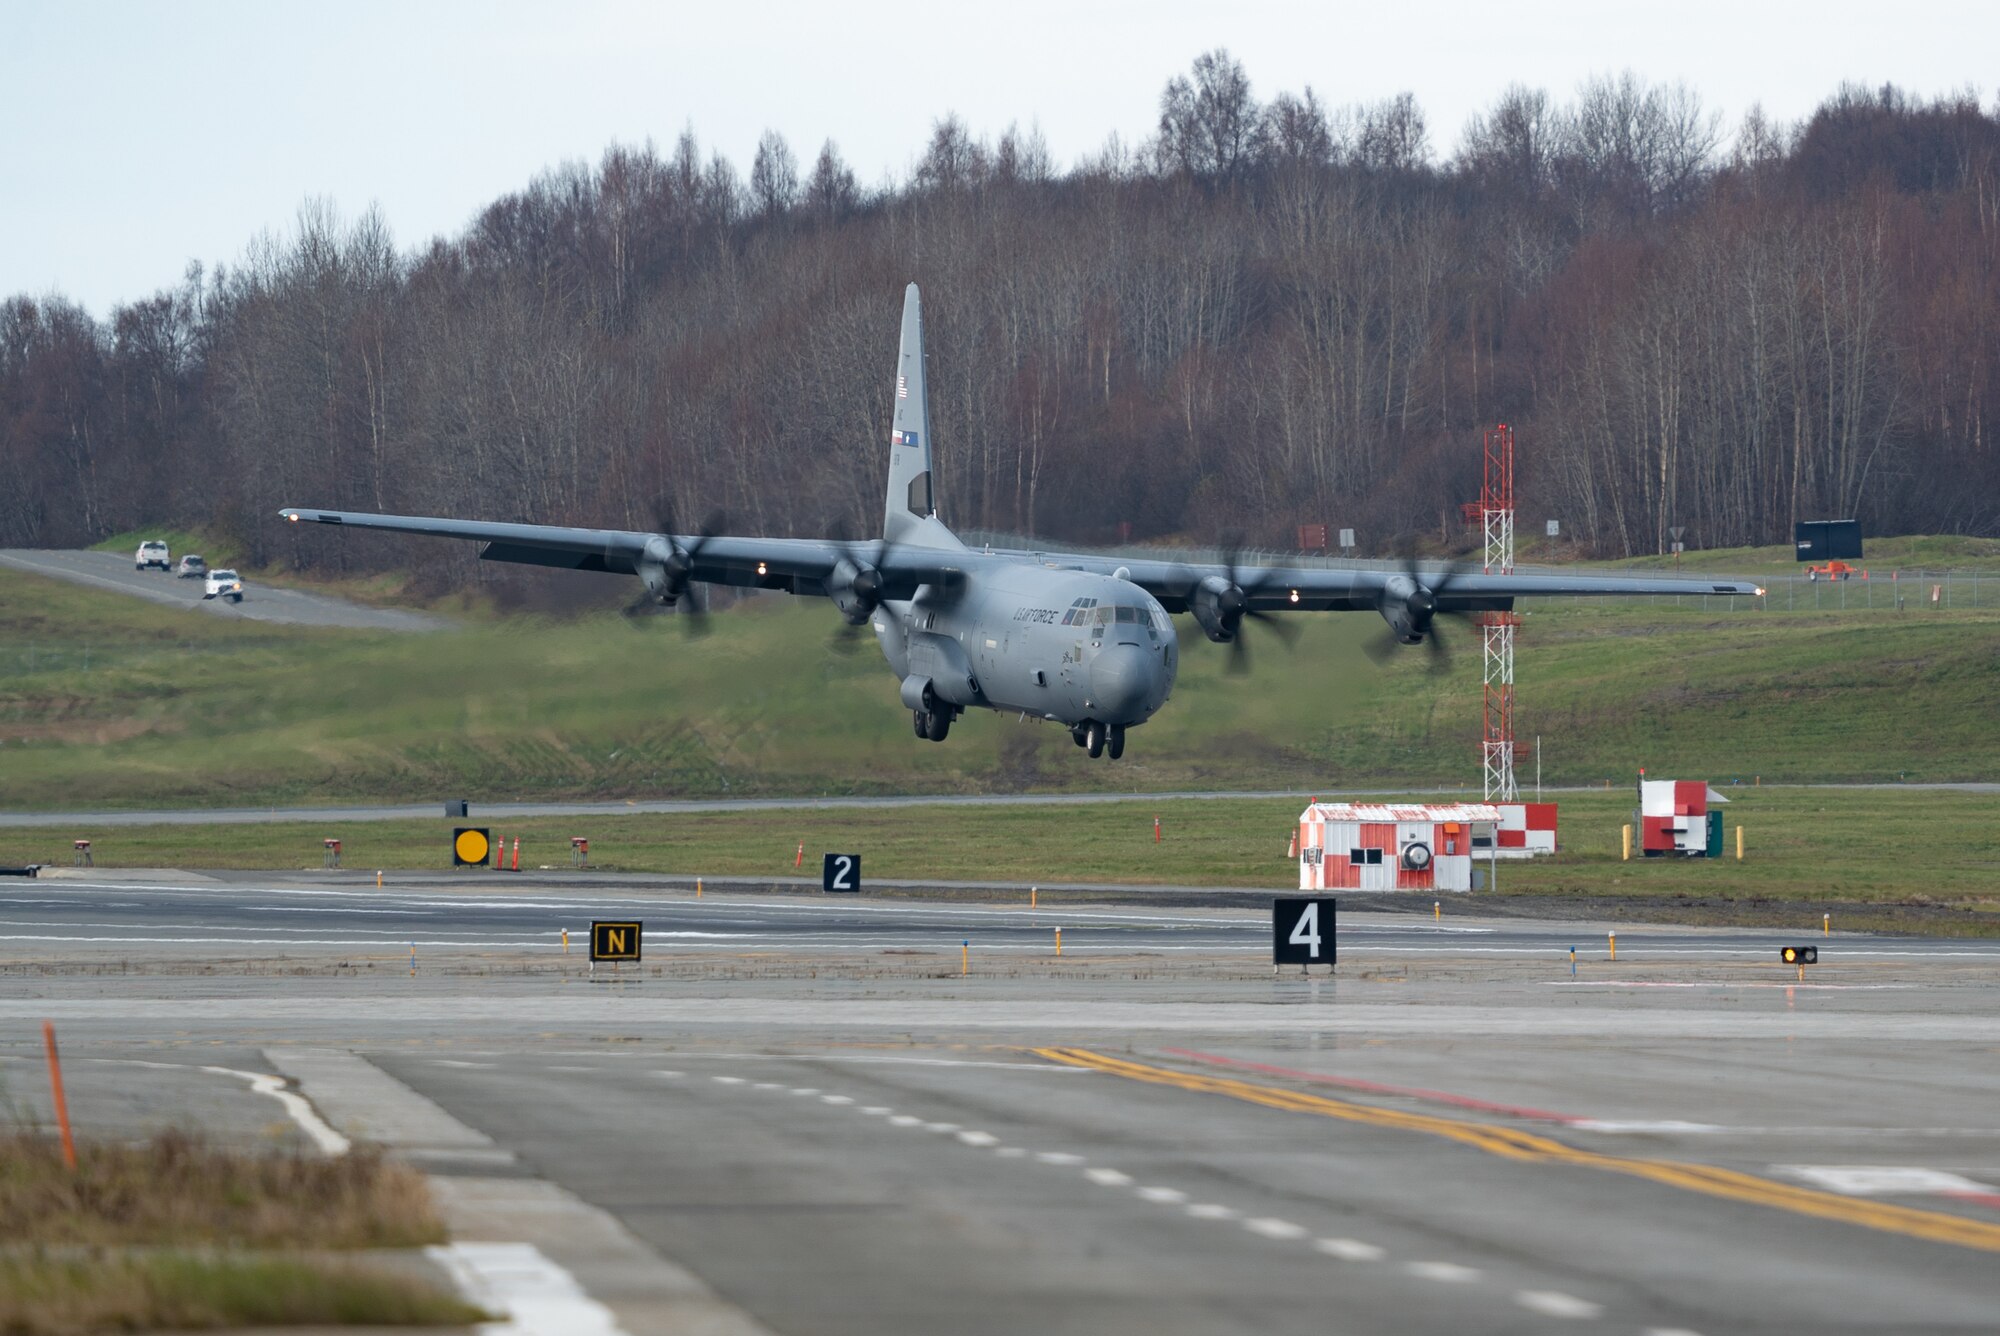 A U.S. Air Force C-130J Super Hercules assigned to the 317th Airlift Wing at Dyess Air Force Base, Texas, prepares to land during RED FLAG-Alaska 23-1 at Joint Base Elmendorf-Richardson, Alaska, Oct. 14, 2022. This exercise provides unique opportunities to integrate various forces into joint, coalition and multilateral training from simulated forward operating bases. (U.S. Air Force photo by Airman 1st Class J. Michael Peña)